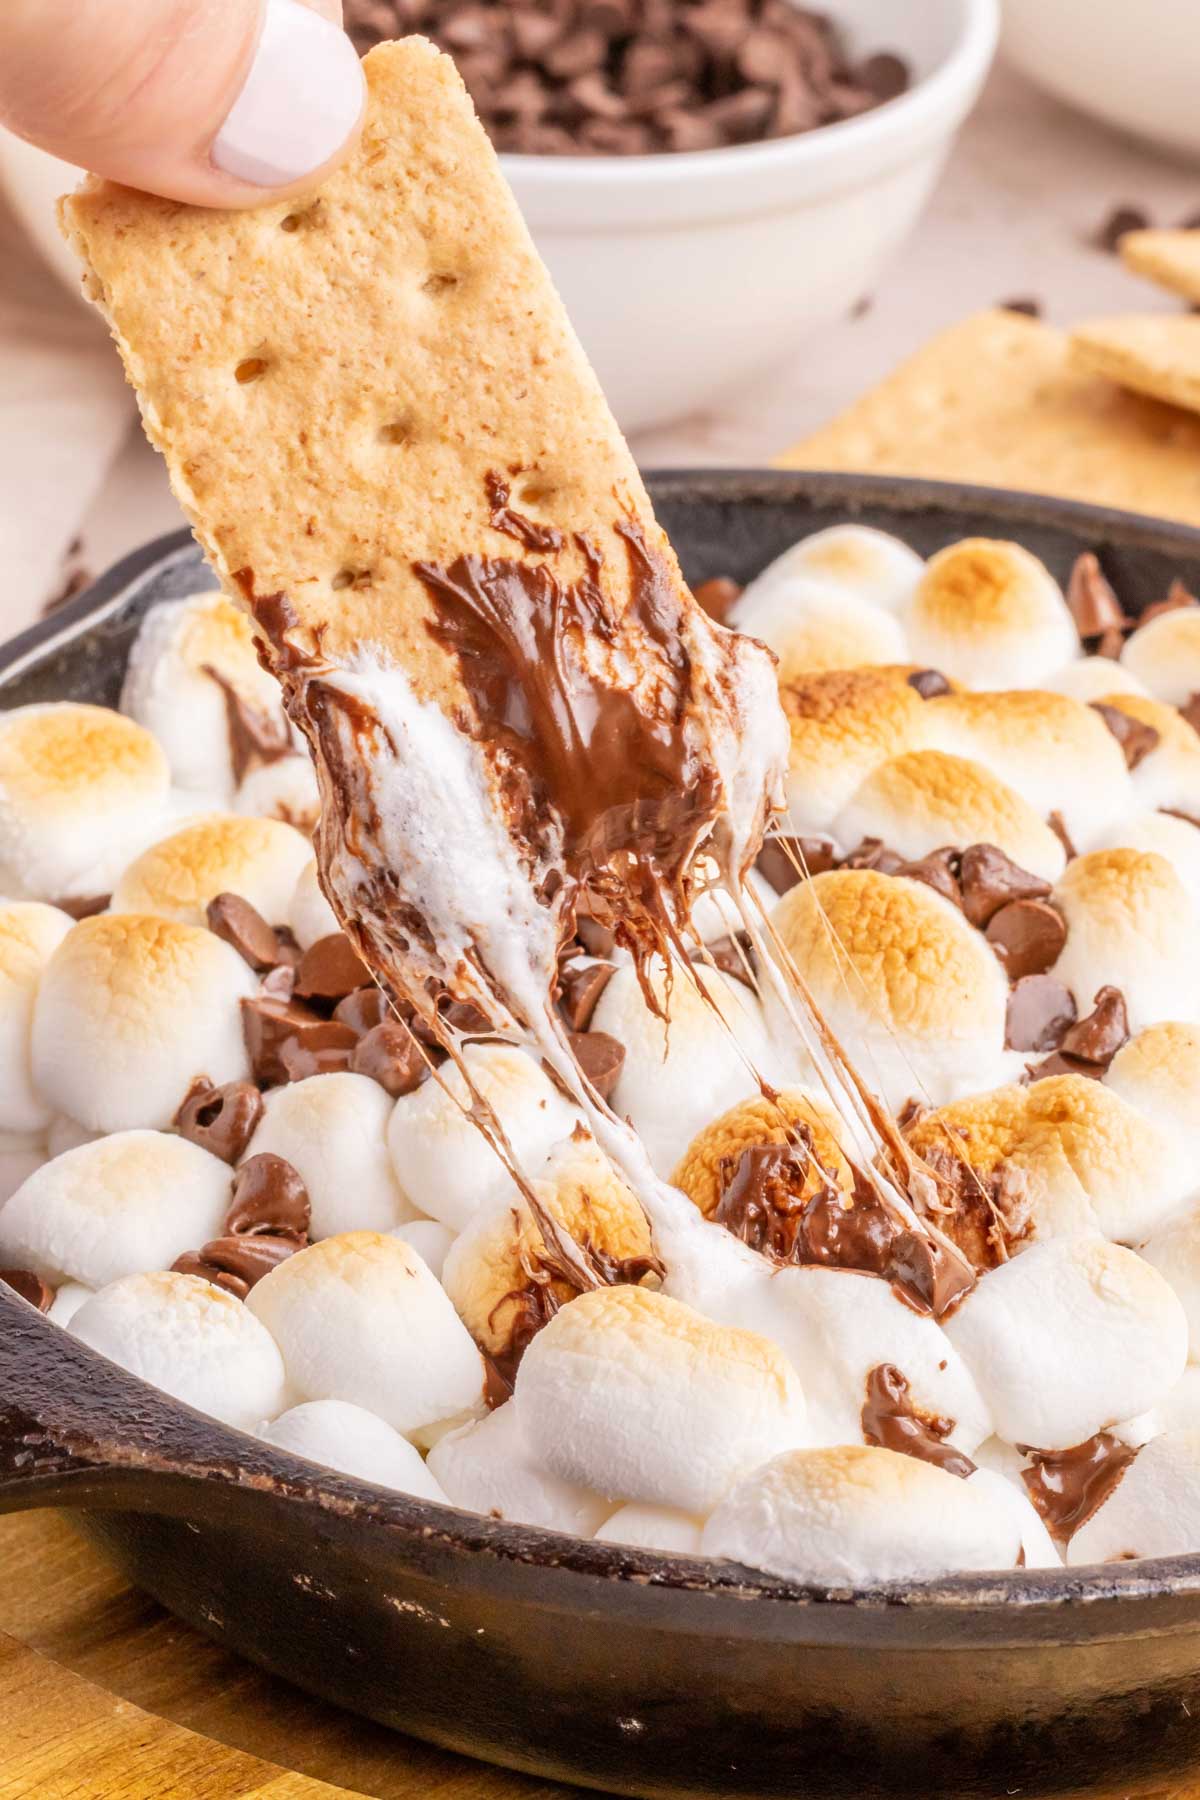 Removing gooey s'mores dip with a honey graham cracker.